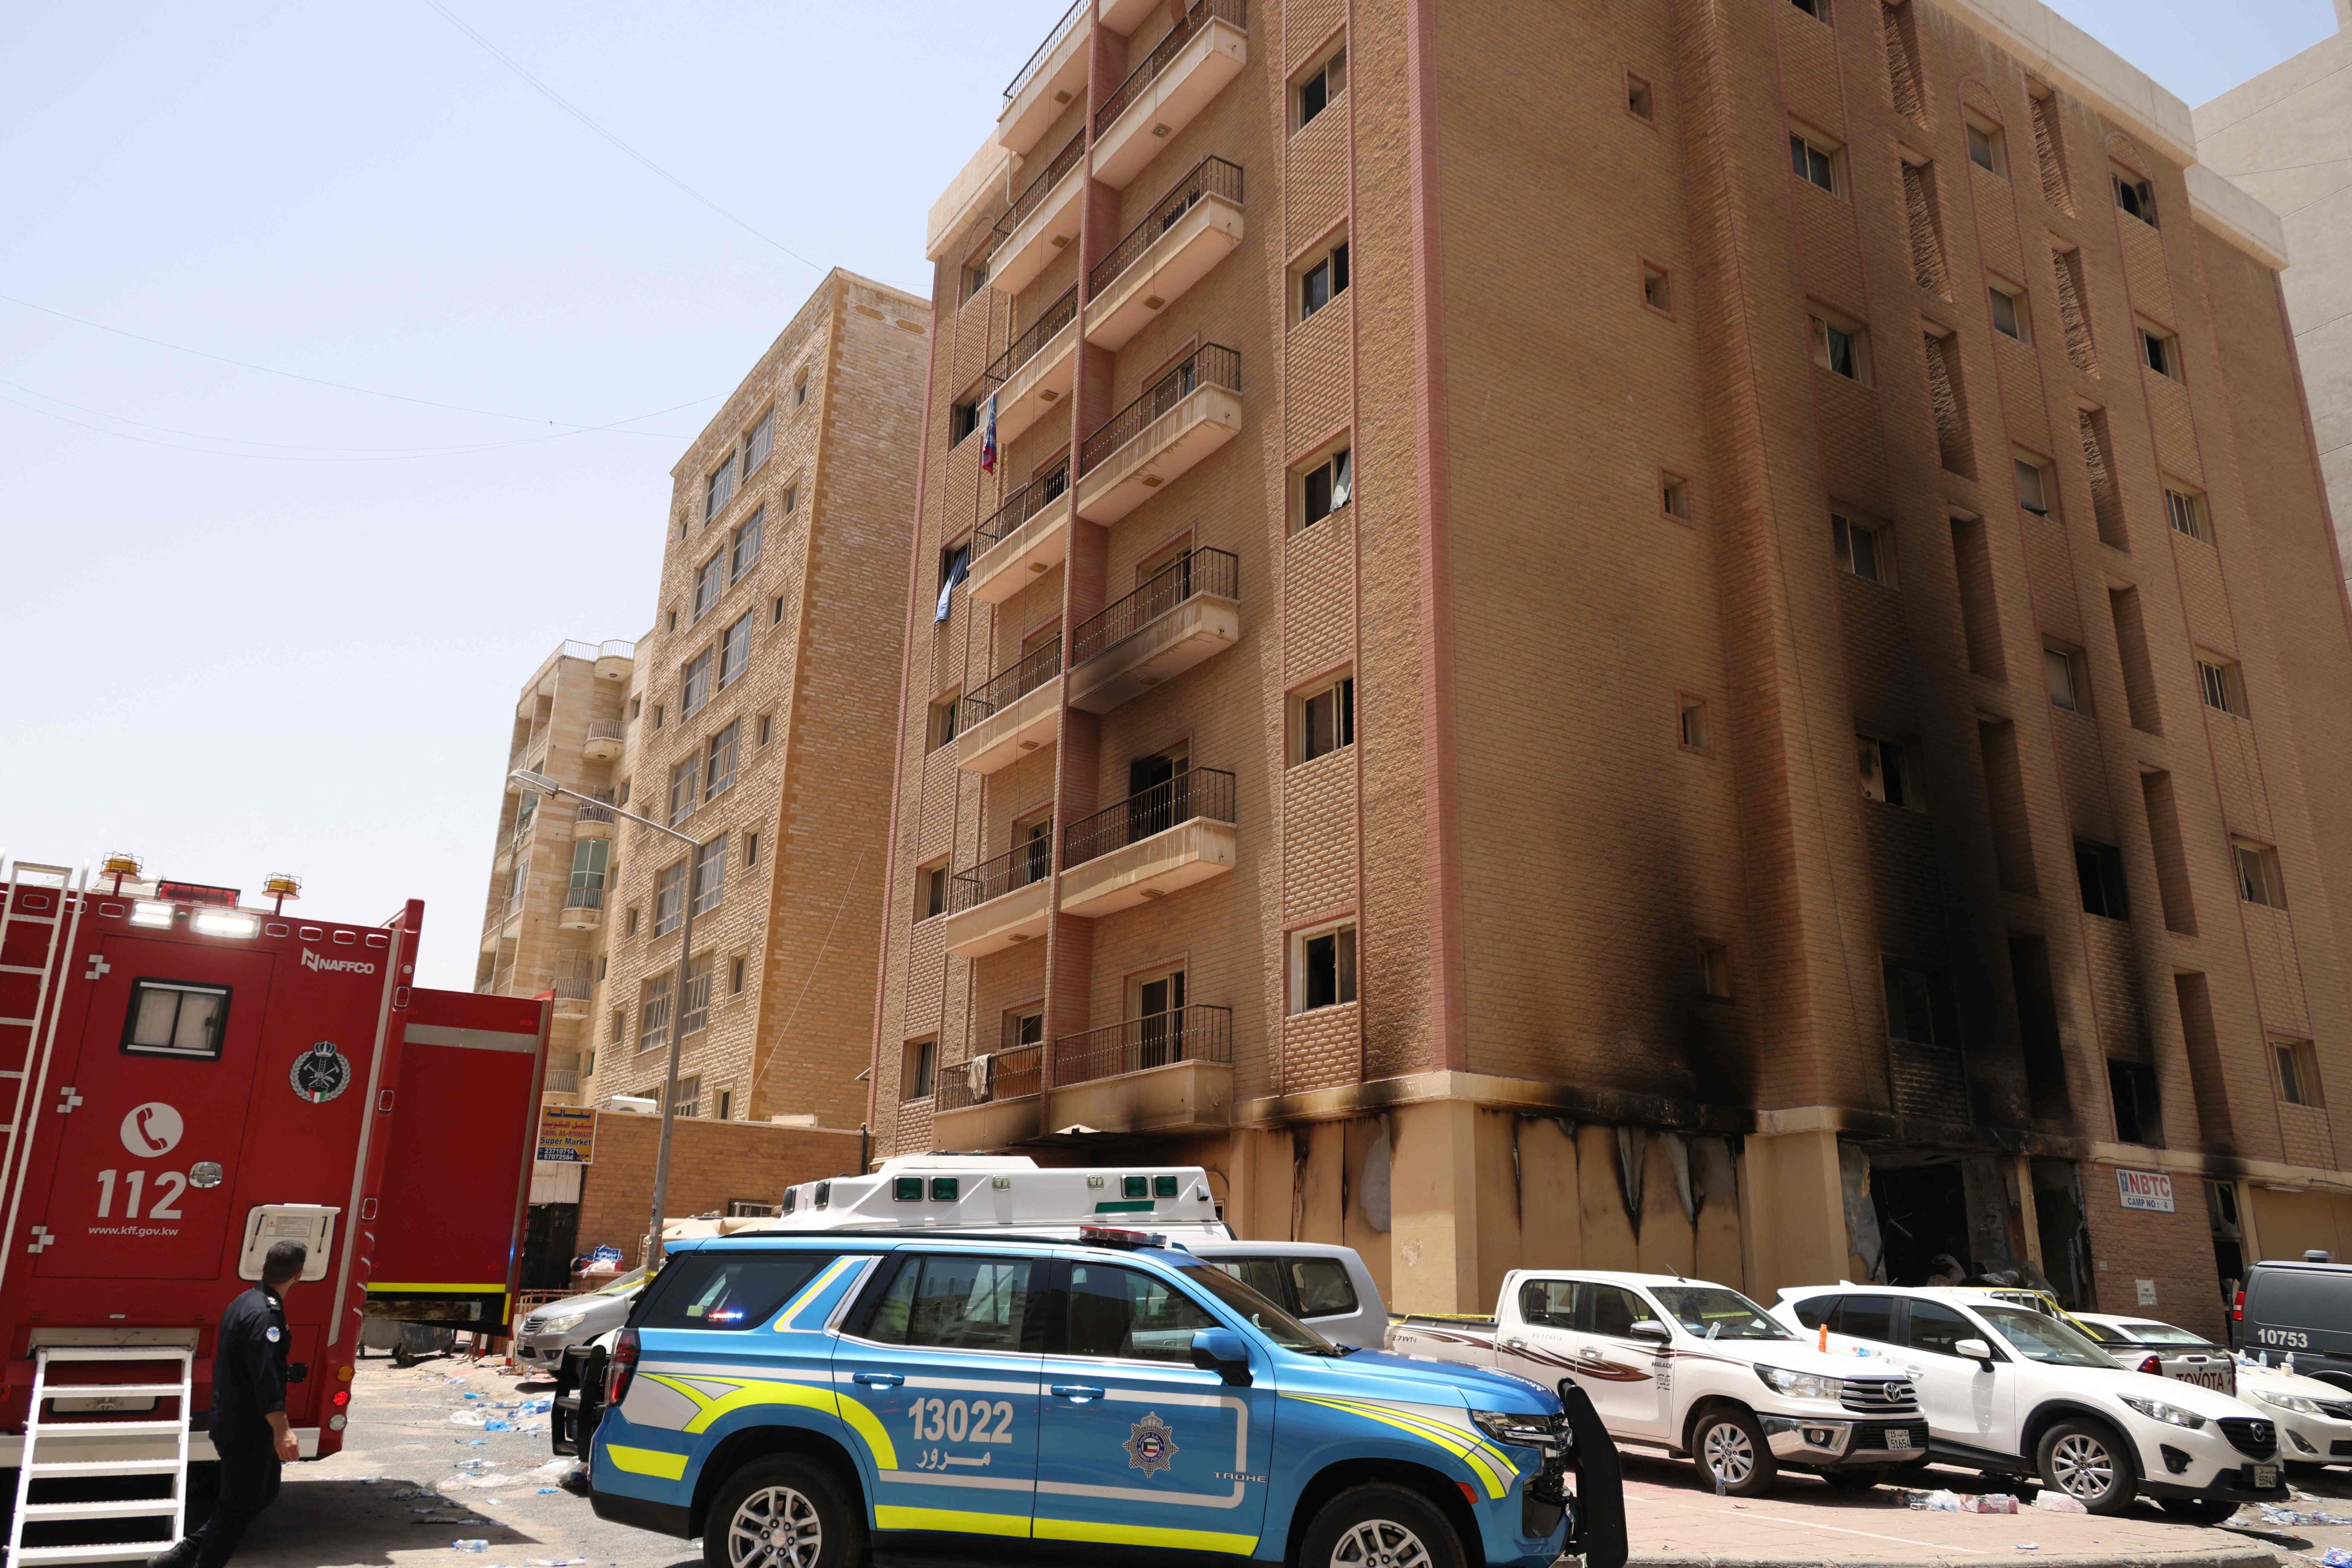 Firefighters and security forces gather outside the blaze-hit building in Kuwait City on June 12. Photo: AFP